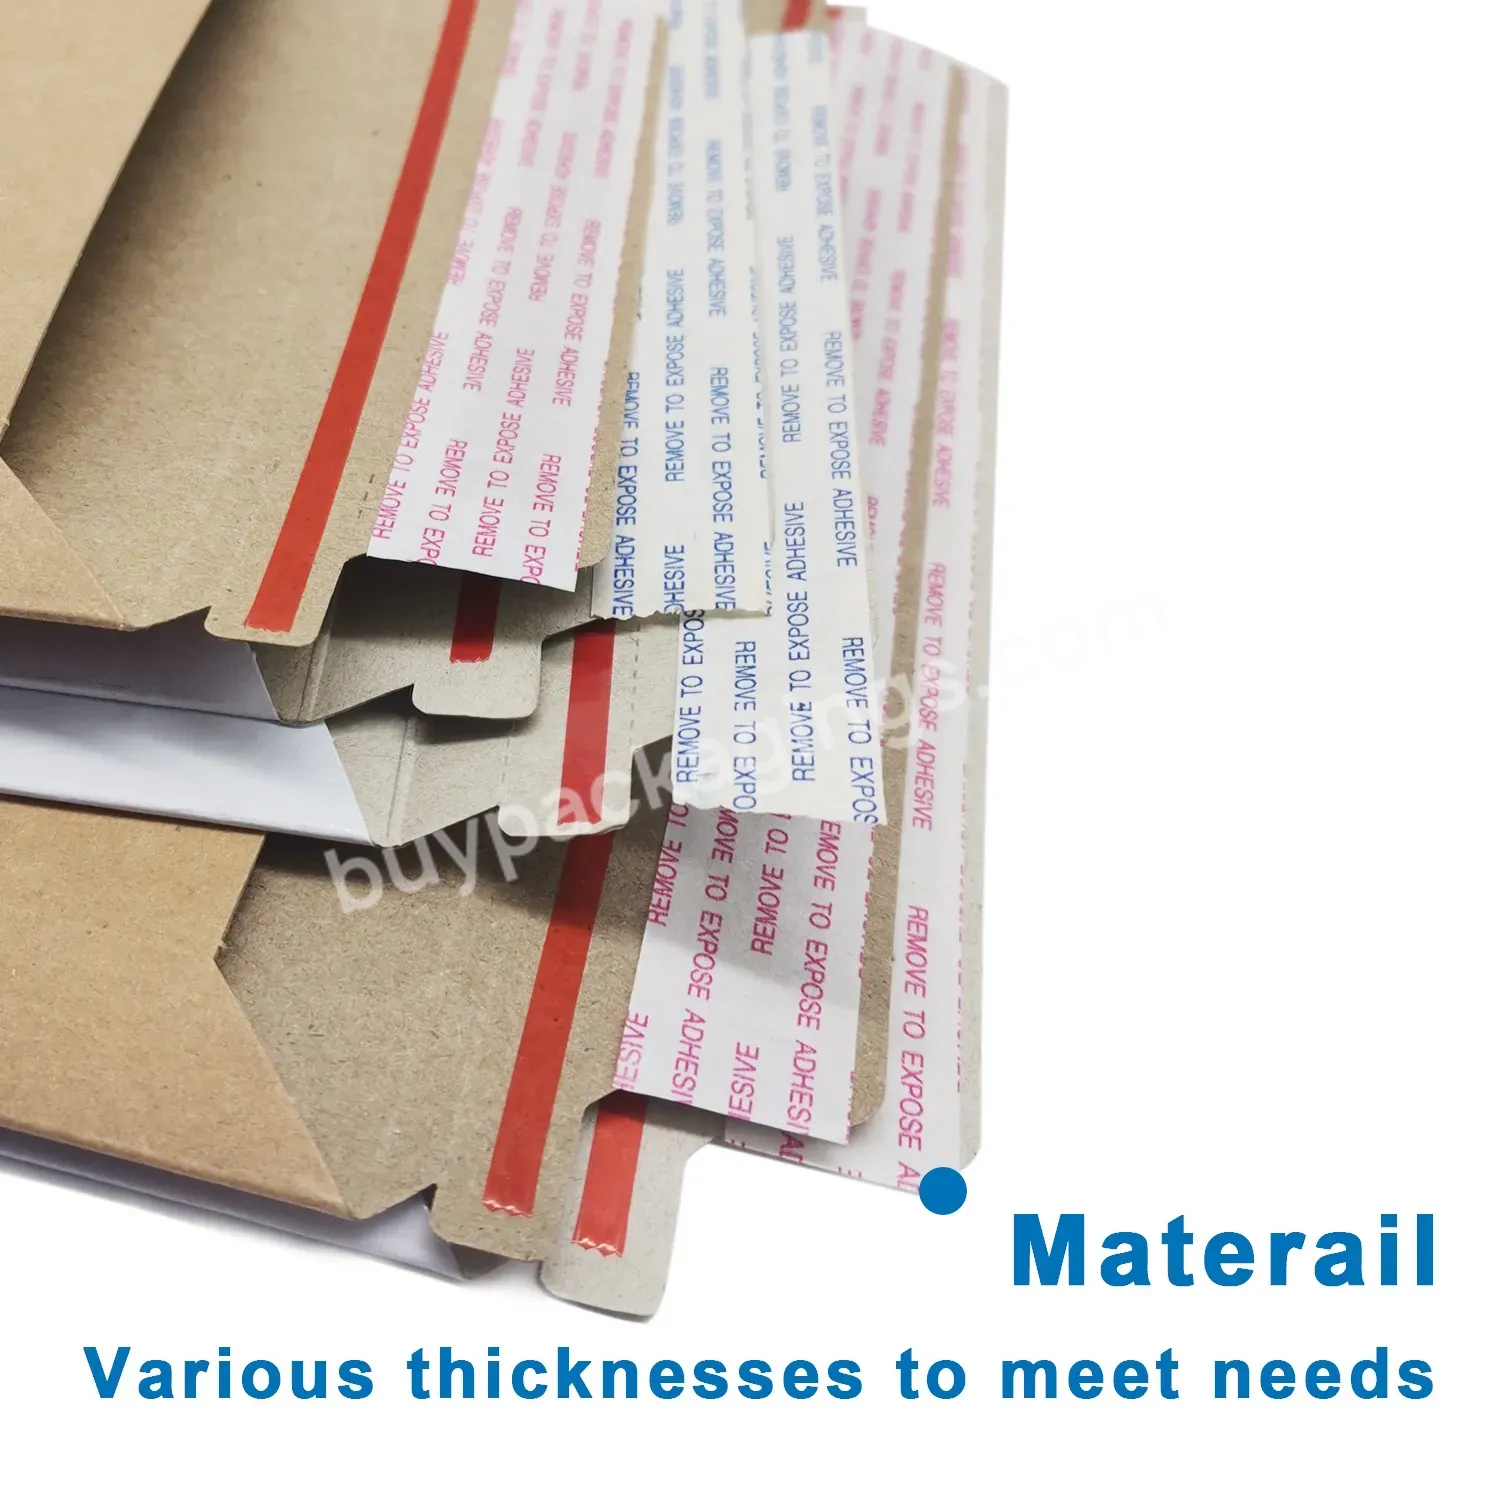 Self Seal Photo Document Mailers Rigid Stay Flat Mailer Envelope Packaging Cardboard Mailer For Art Prints,Photos,Cds,Books - Buy Rigid Stay Flat Mailer,Rigid Envelope Packaging,Rigid Stay Flat Cardboard Mailer.